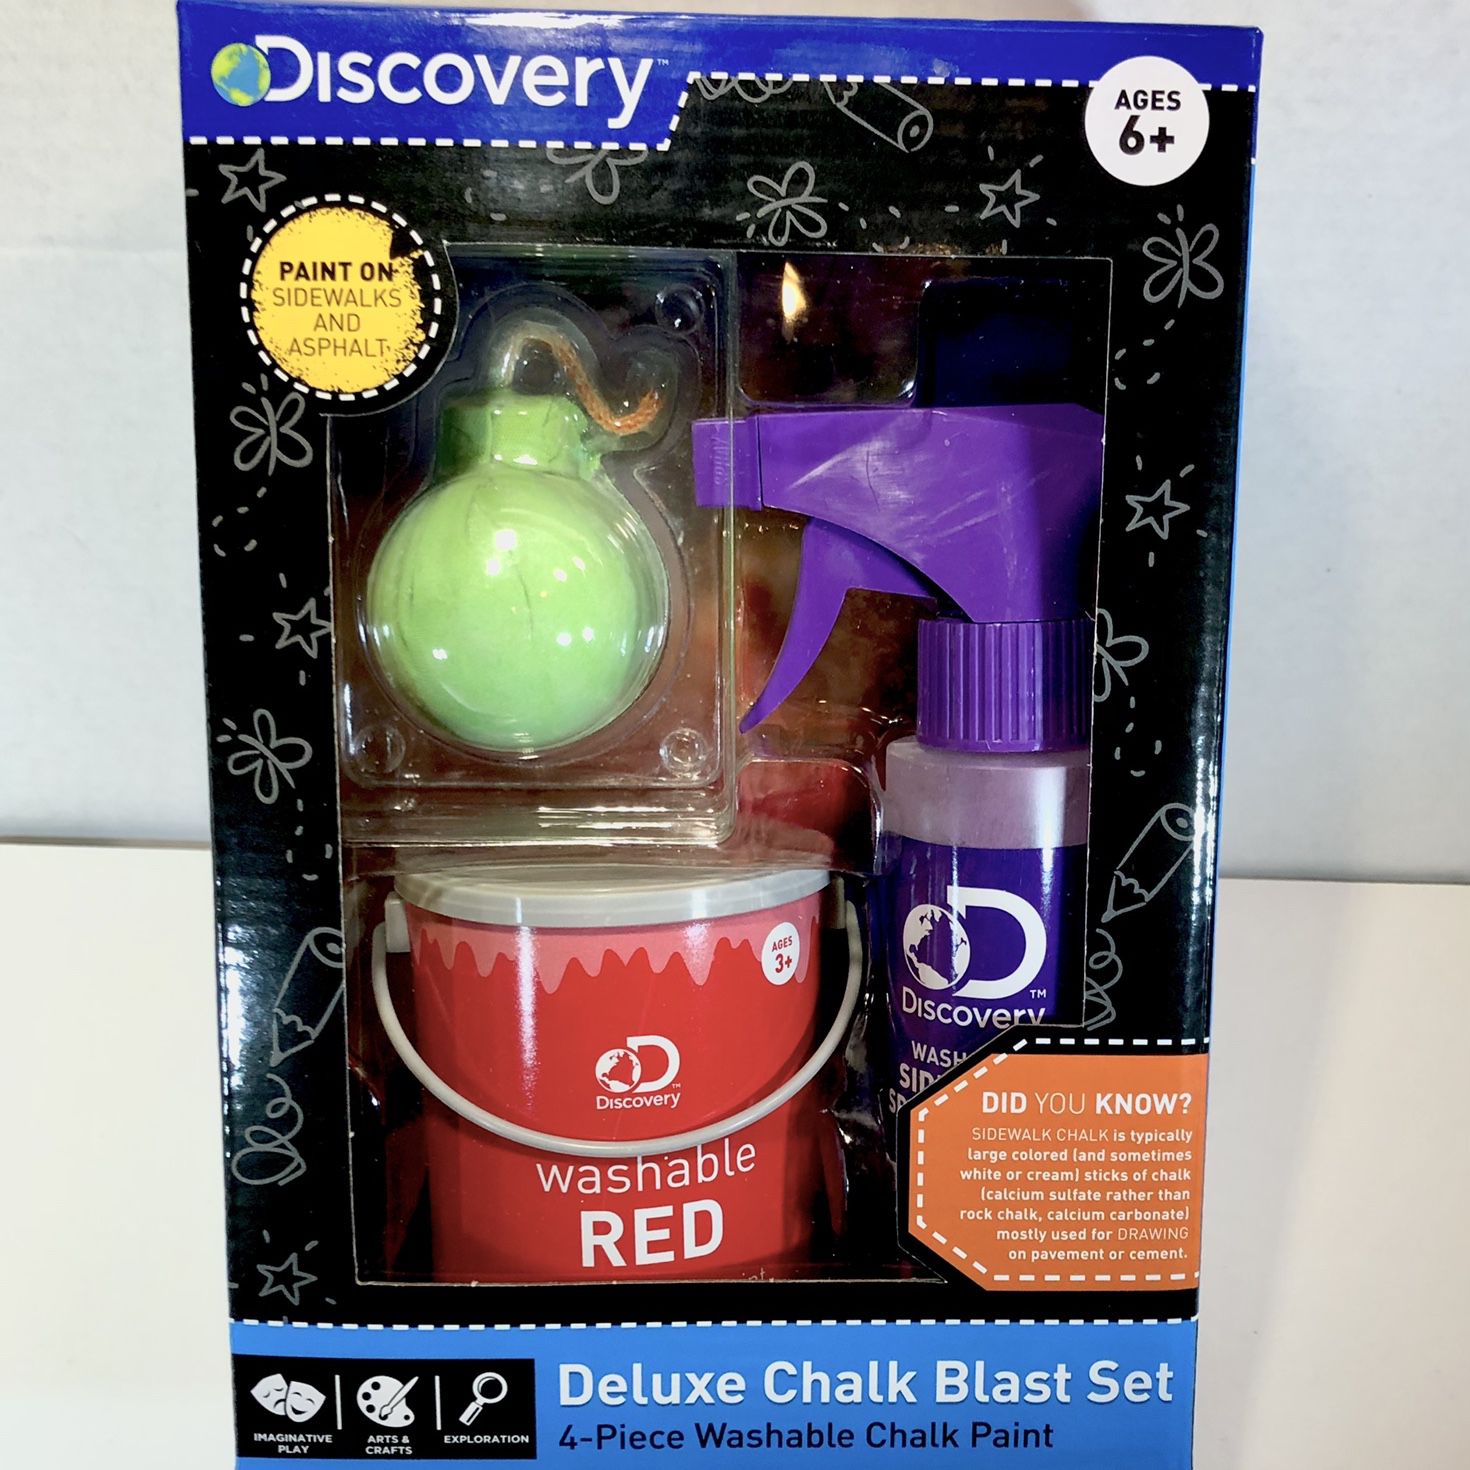 Discovery Deluxe Chalk Blast Set 4-Piece Washable Chalk Paint, NEW